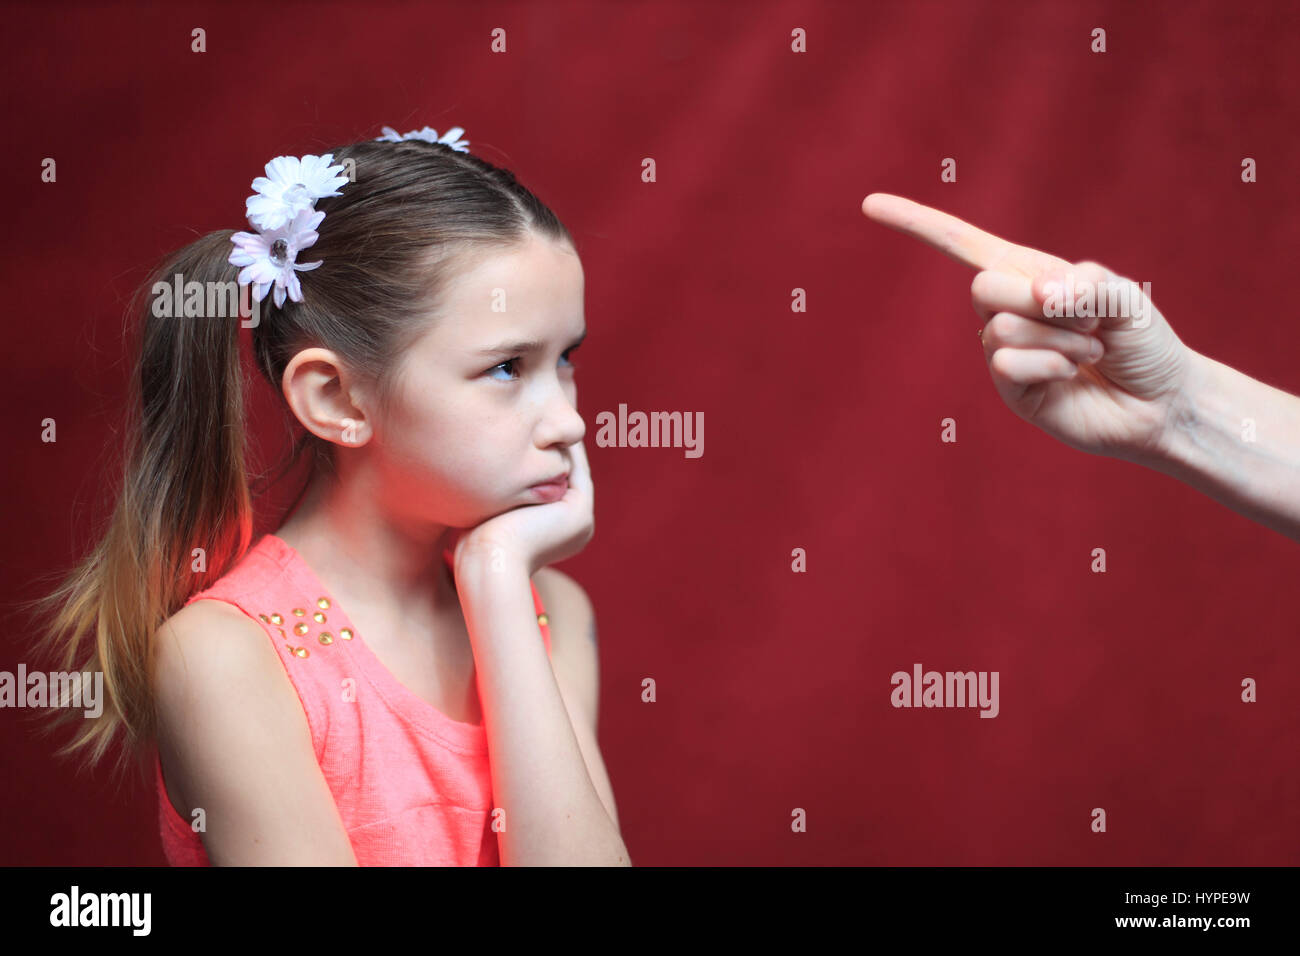 France, 10 years old girl facing parental authority Stock Photo